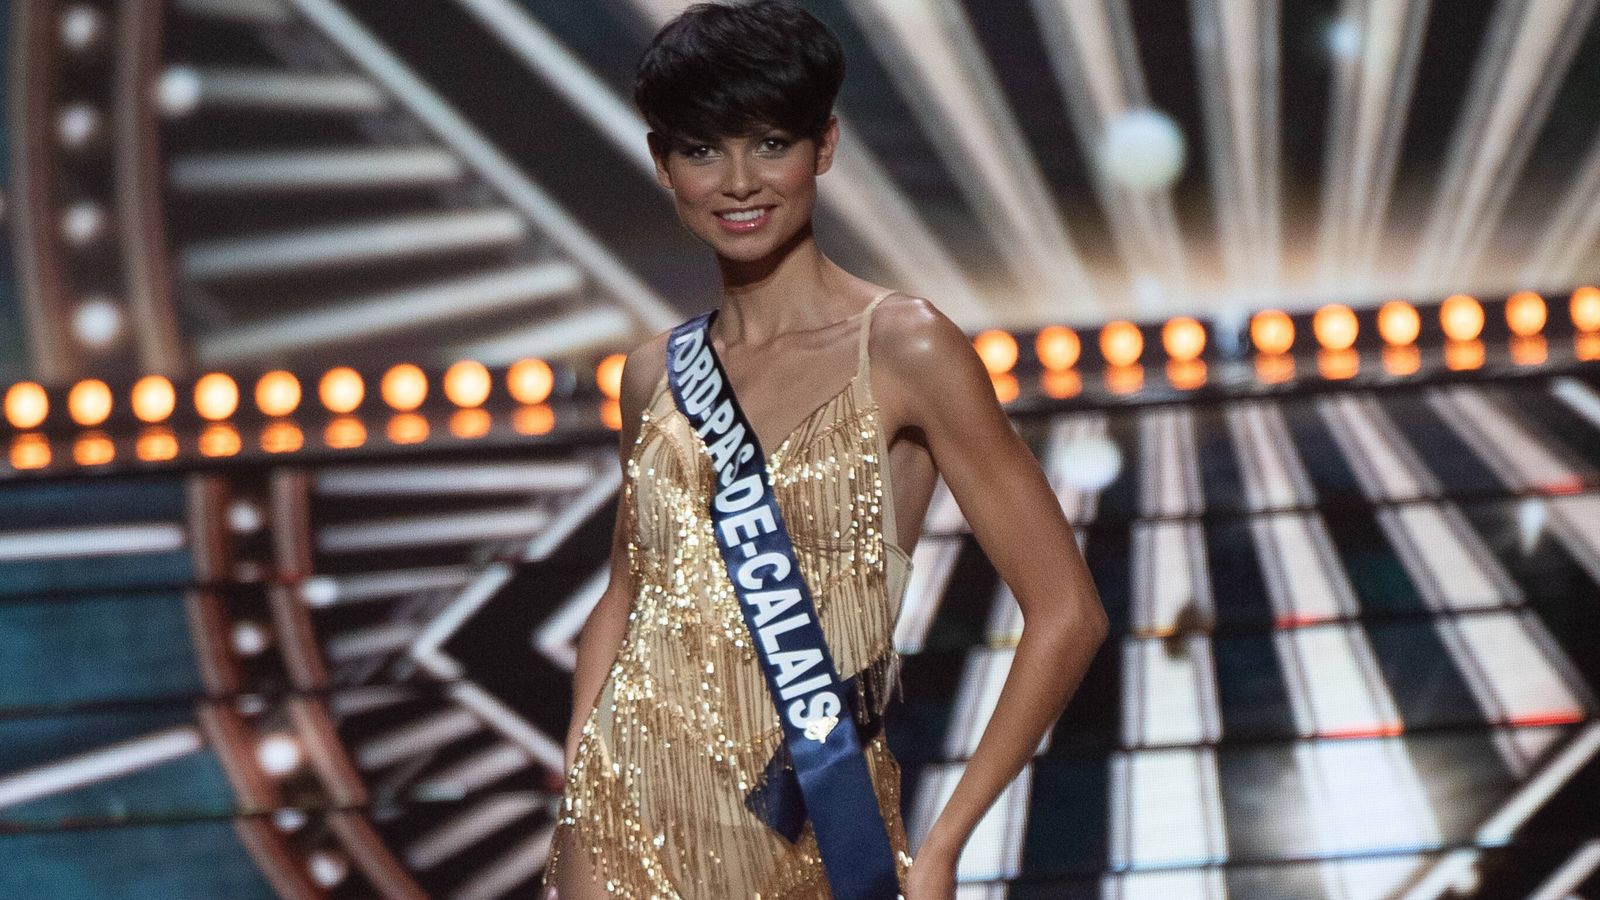 Miss France winner with short hair defended after online criticism